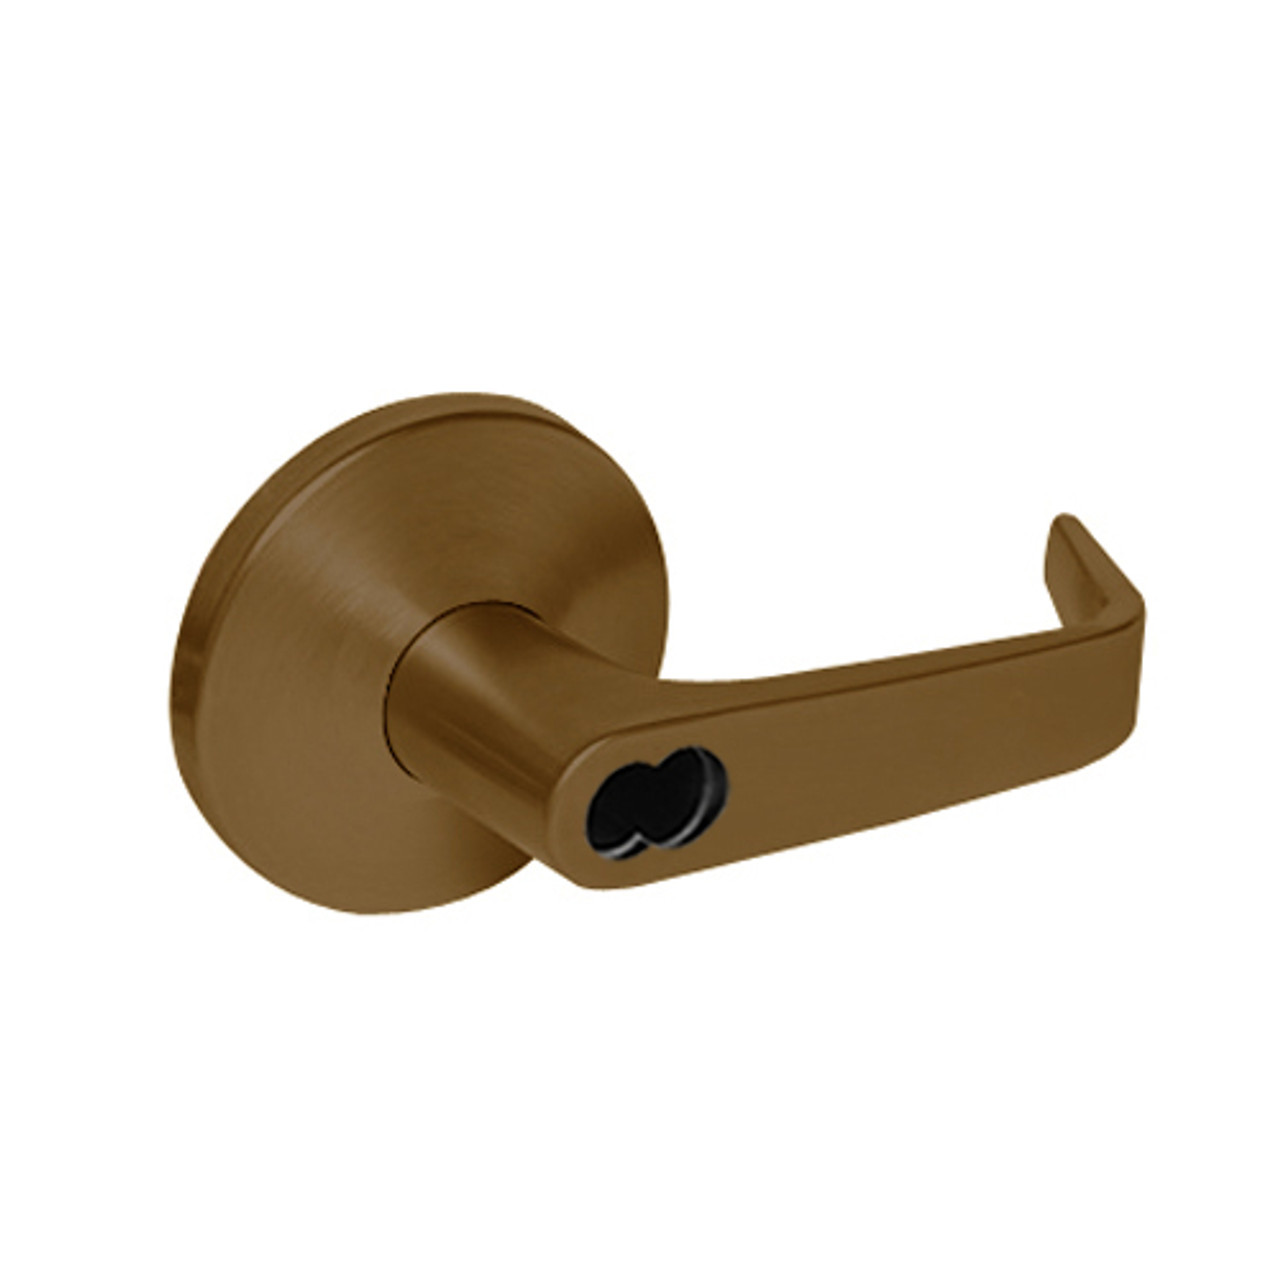 9K37T15LS3690LM Best 9K Series Dormitory Cylindrical Lever Locks with Contour Angle with Return Lever Design Accept 7 Pin Best Core in Dark Bronze